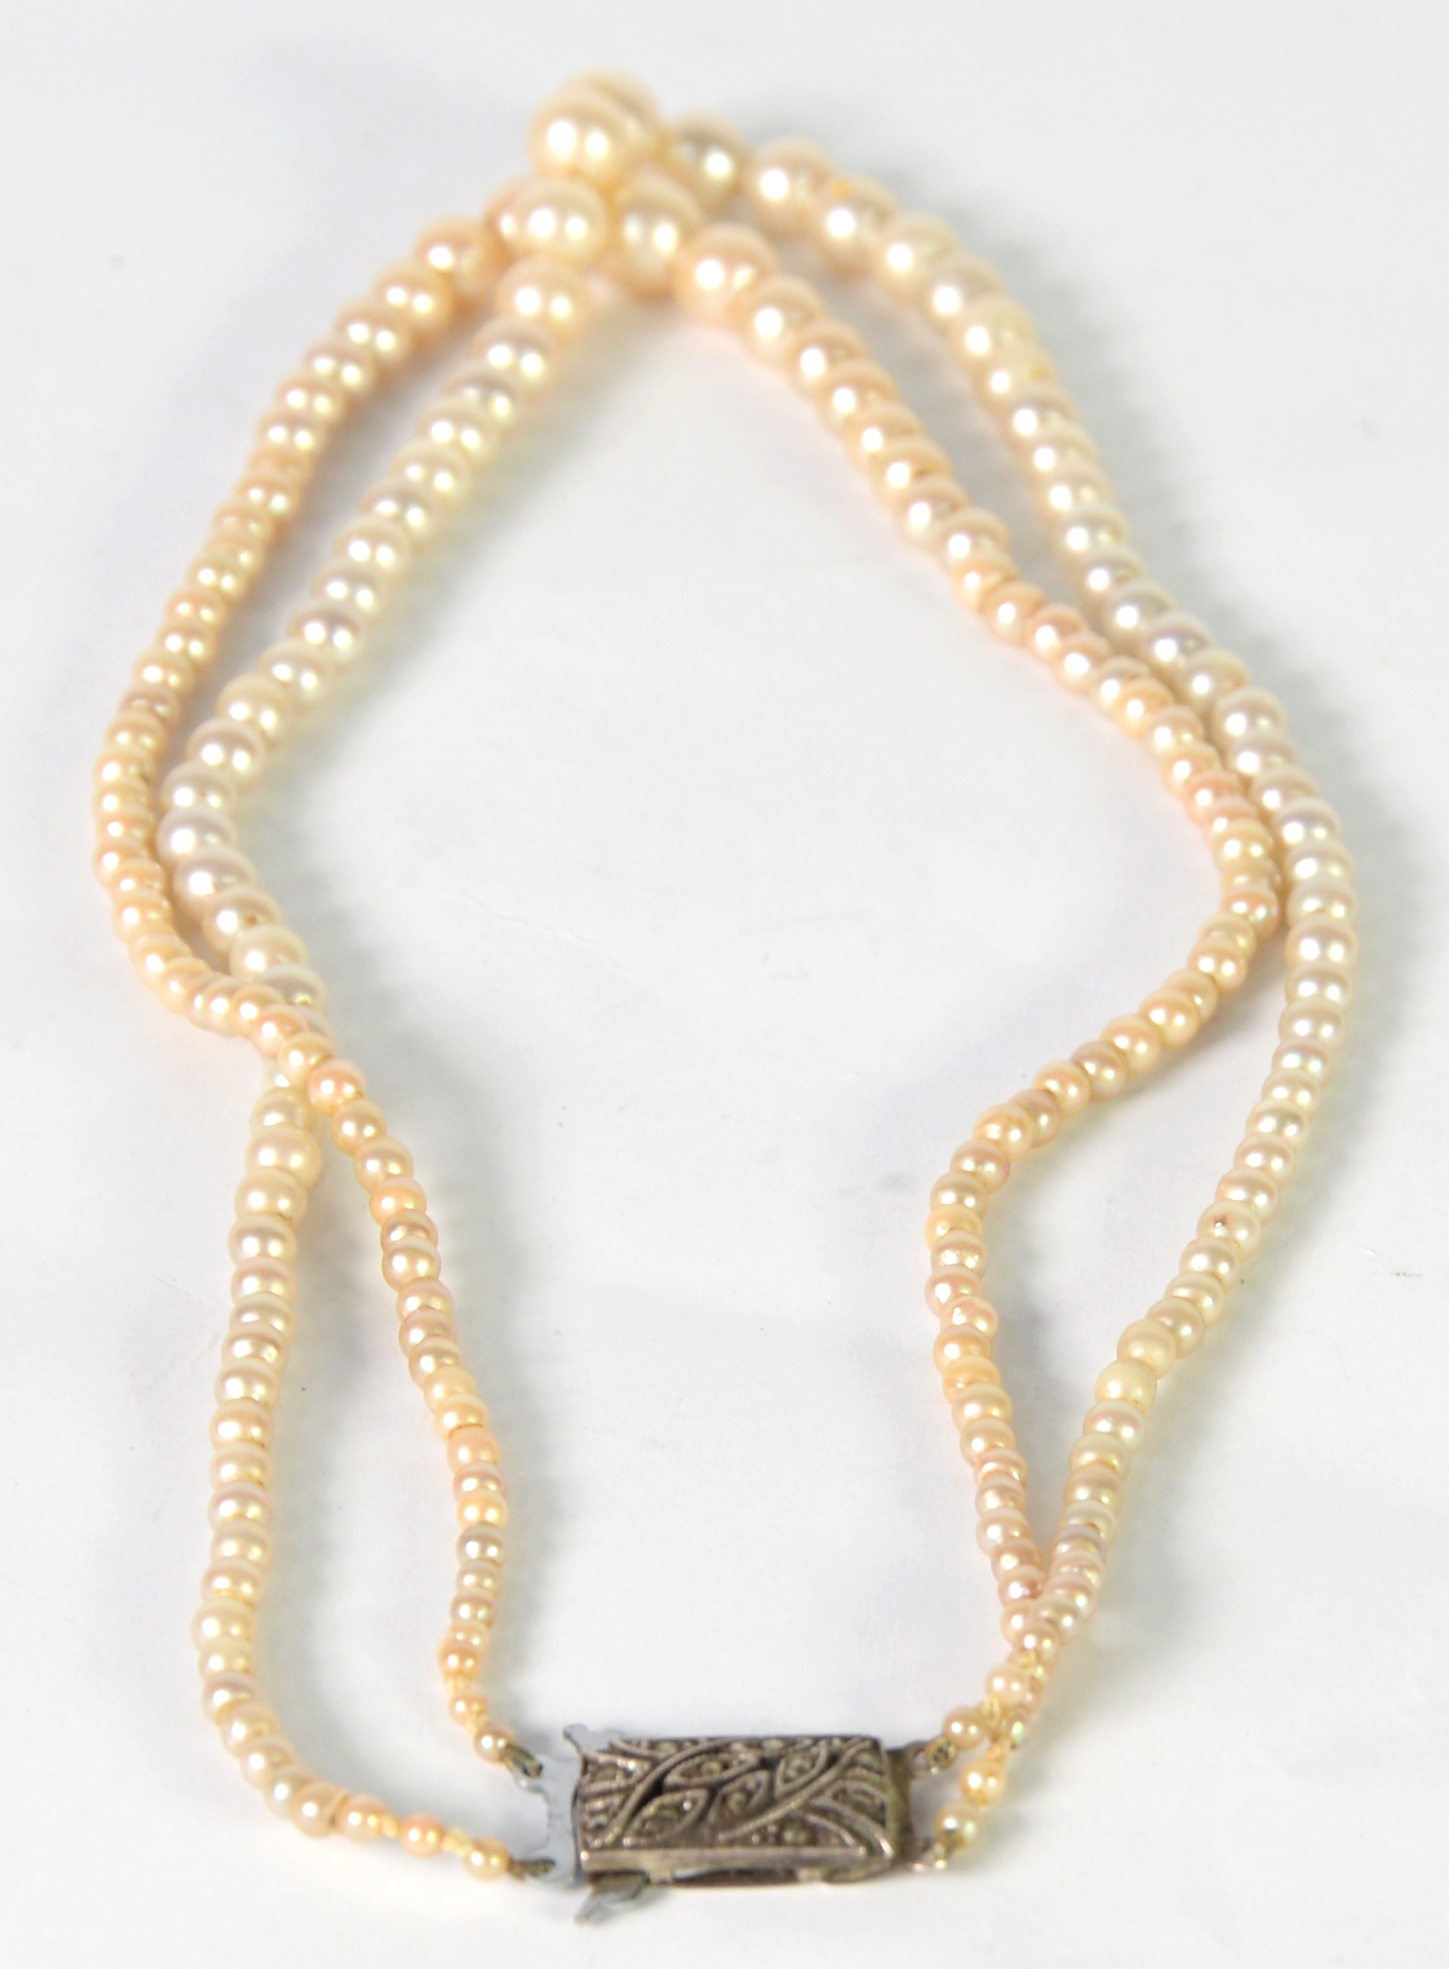 TWO-STRAND NECKLACE OF GRADUATED CULTURED PEARLS with silver and marcasite clasp, 16in (40.5cm) long